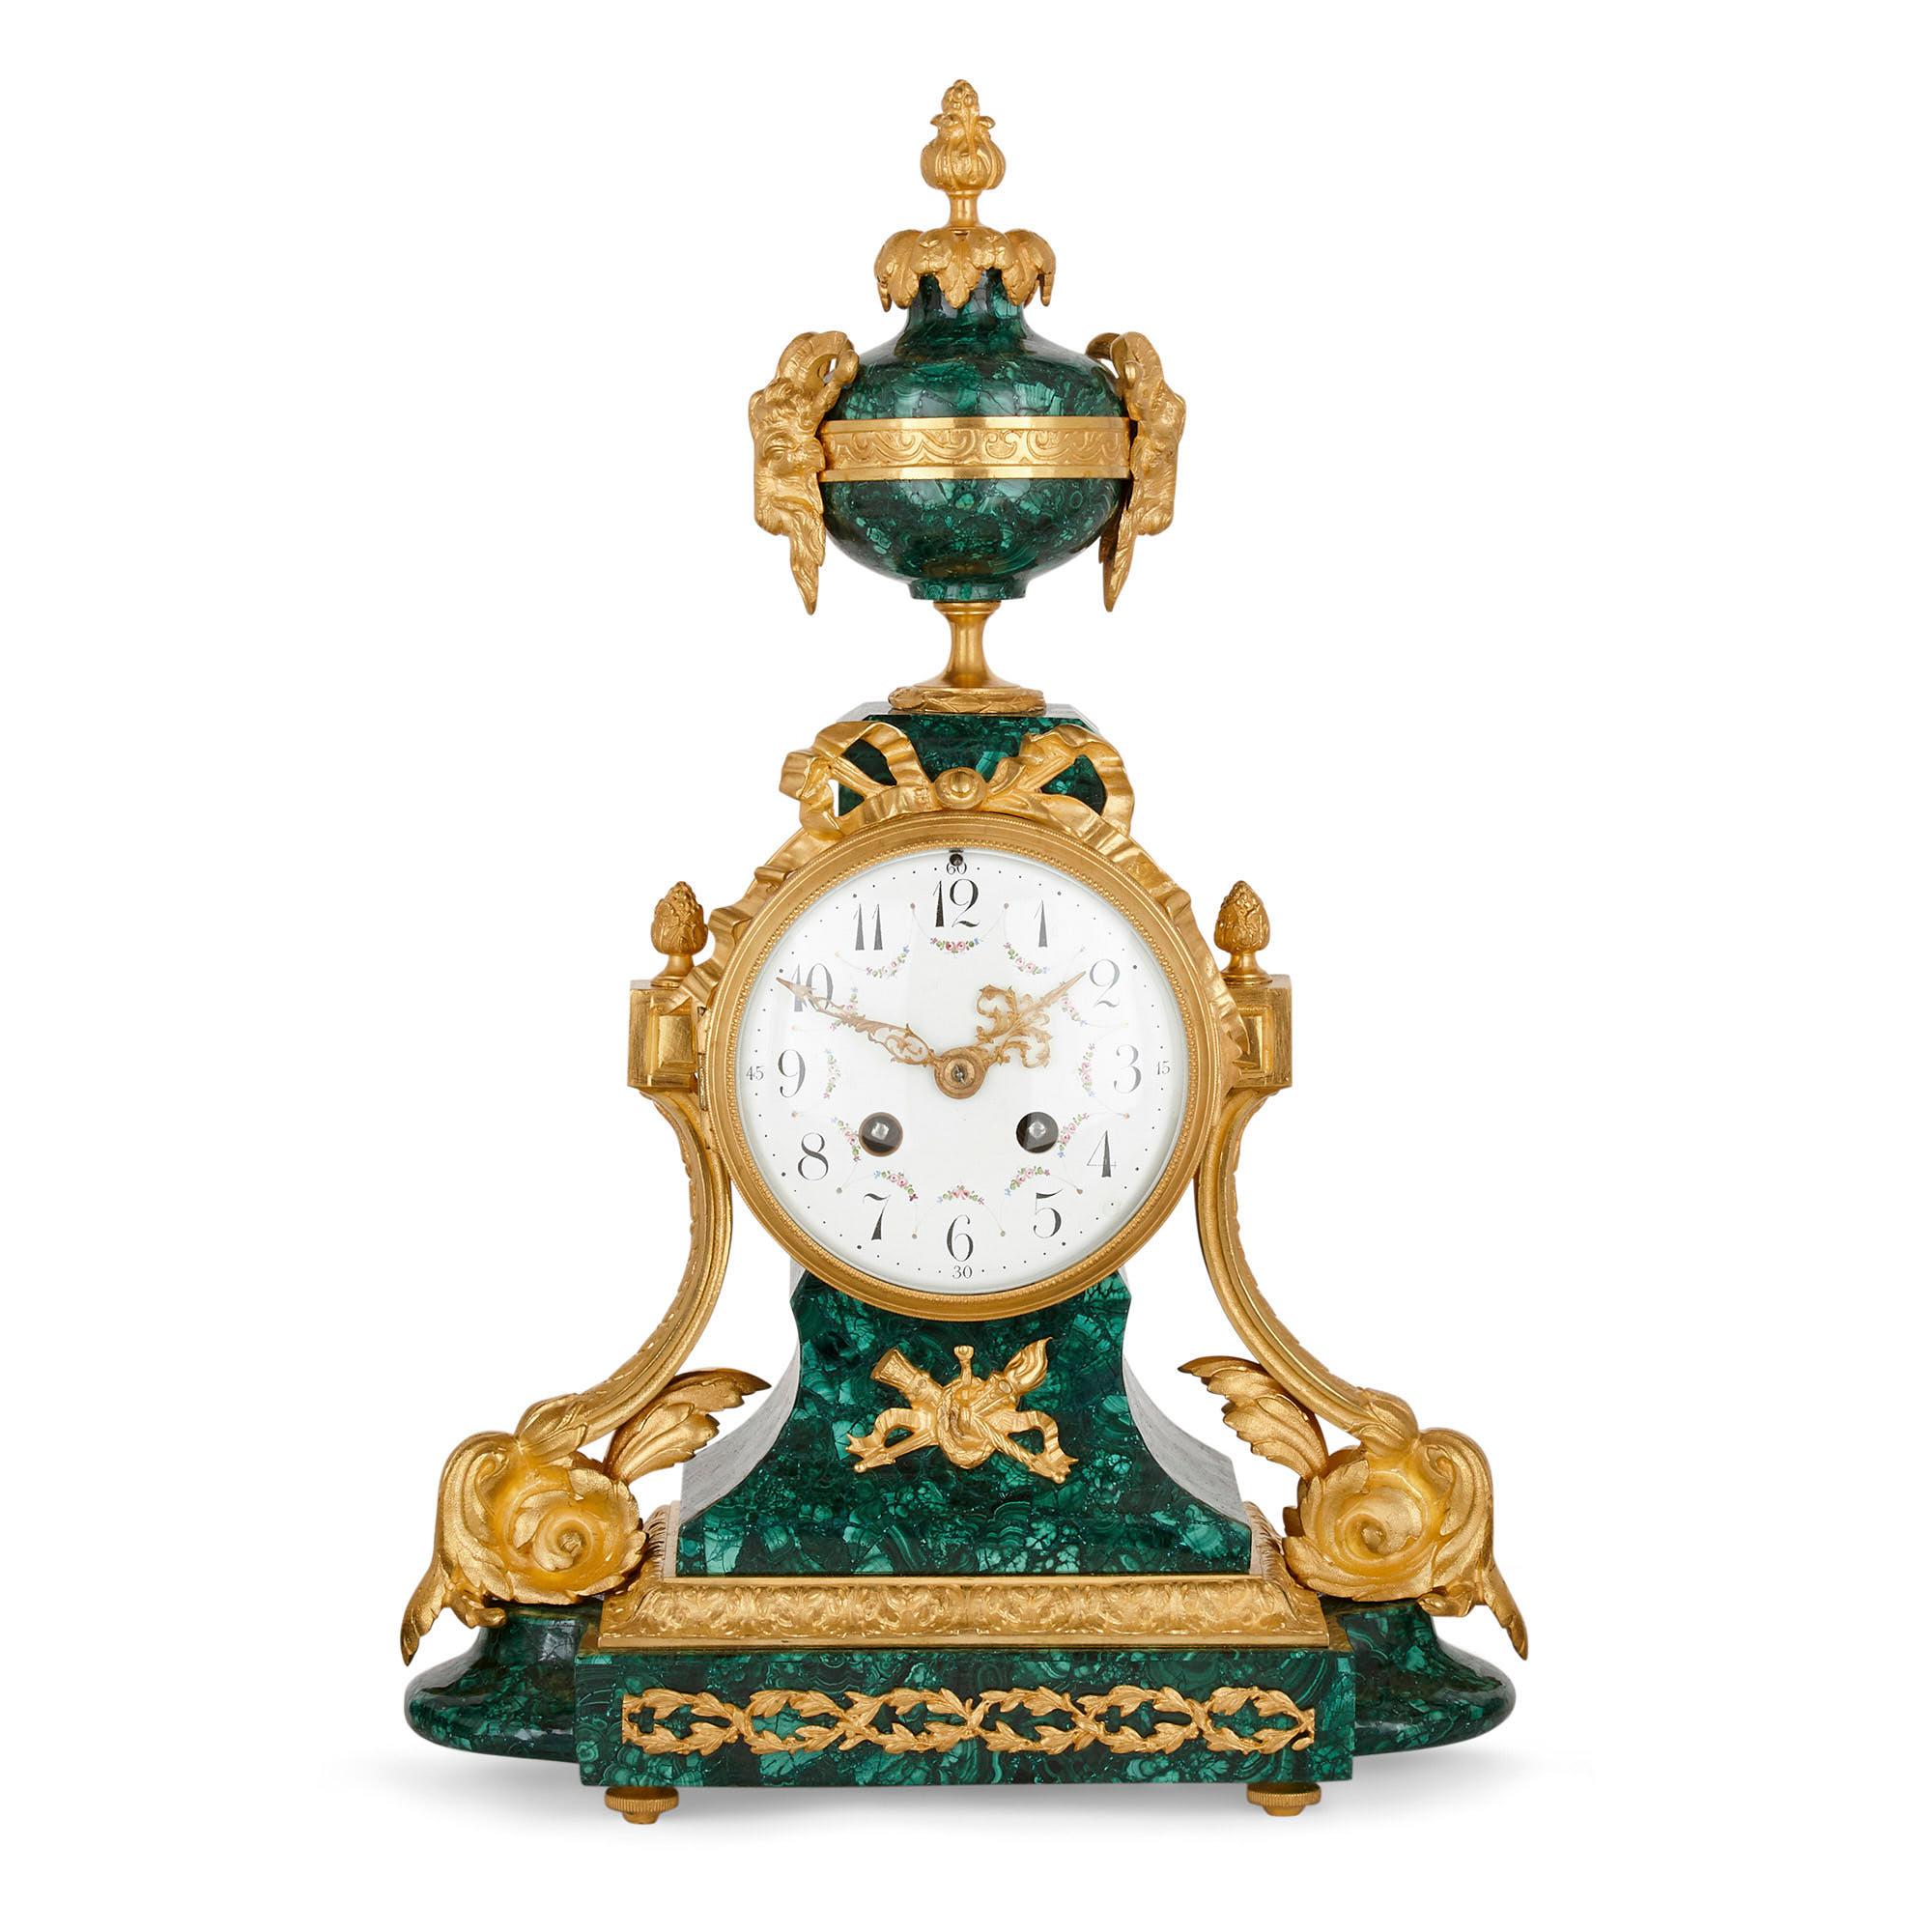 Antique Neoclassical style French mantel clock with twin vases,
French, early 20th century
Clock: Height 42cm, width 11cm, depth 14cm
Vases: Height 33cm, diameter 9.5cm

Designed in the distinctive Louis XVI Neoclassical Style, this early 20th